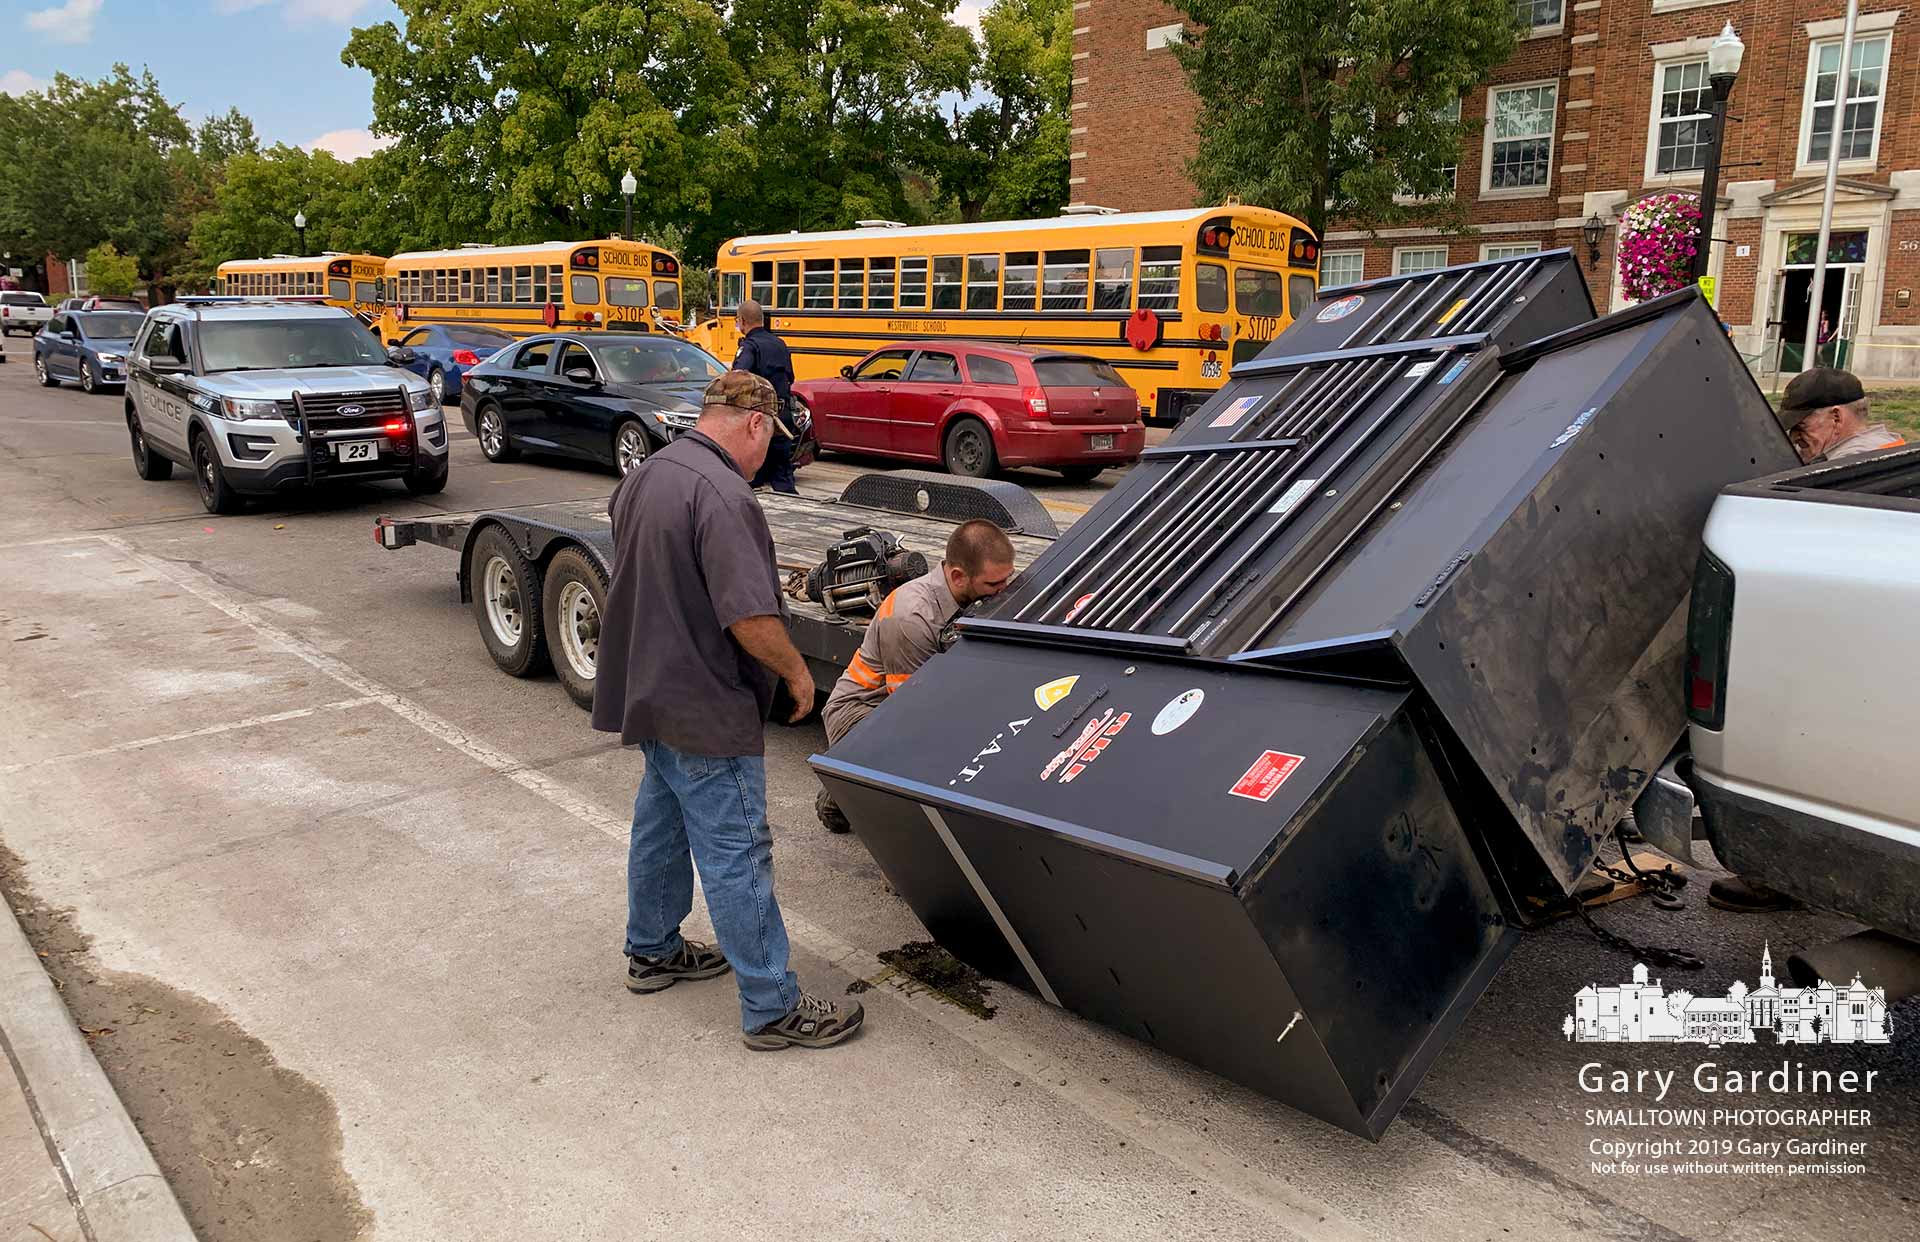 Workers for V.A.T., Inc. work to right a toolbox that slipped from its moorings on a trailer and tumbled onto State Street in front of Hanby Elementary. My Final Photo for Sept. 20, 2019.